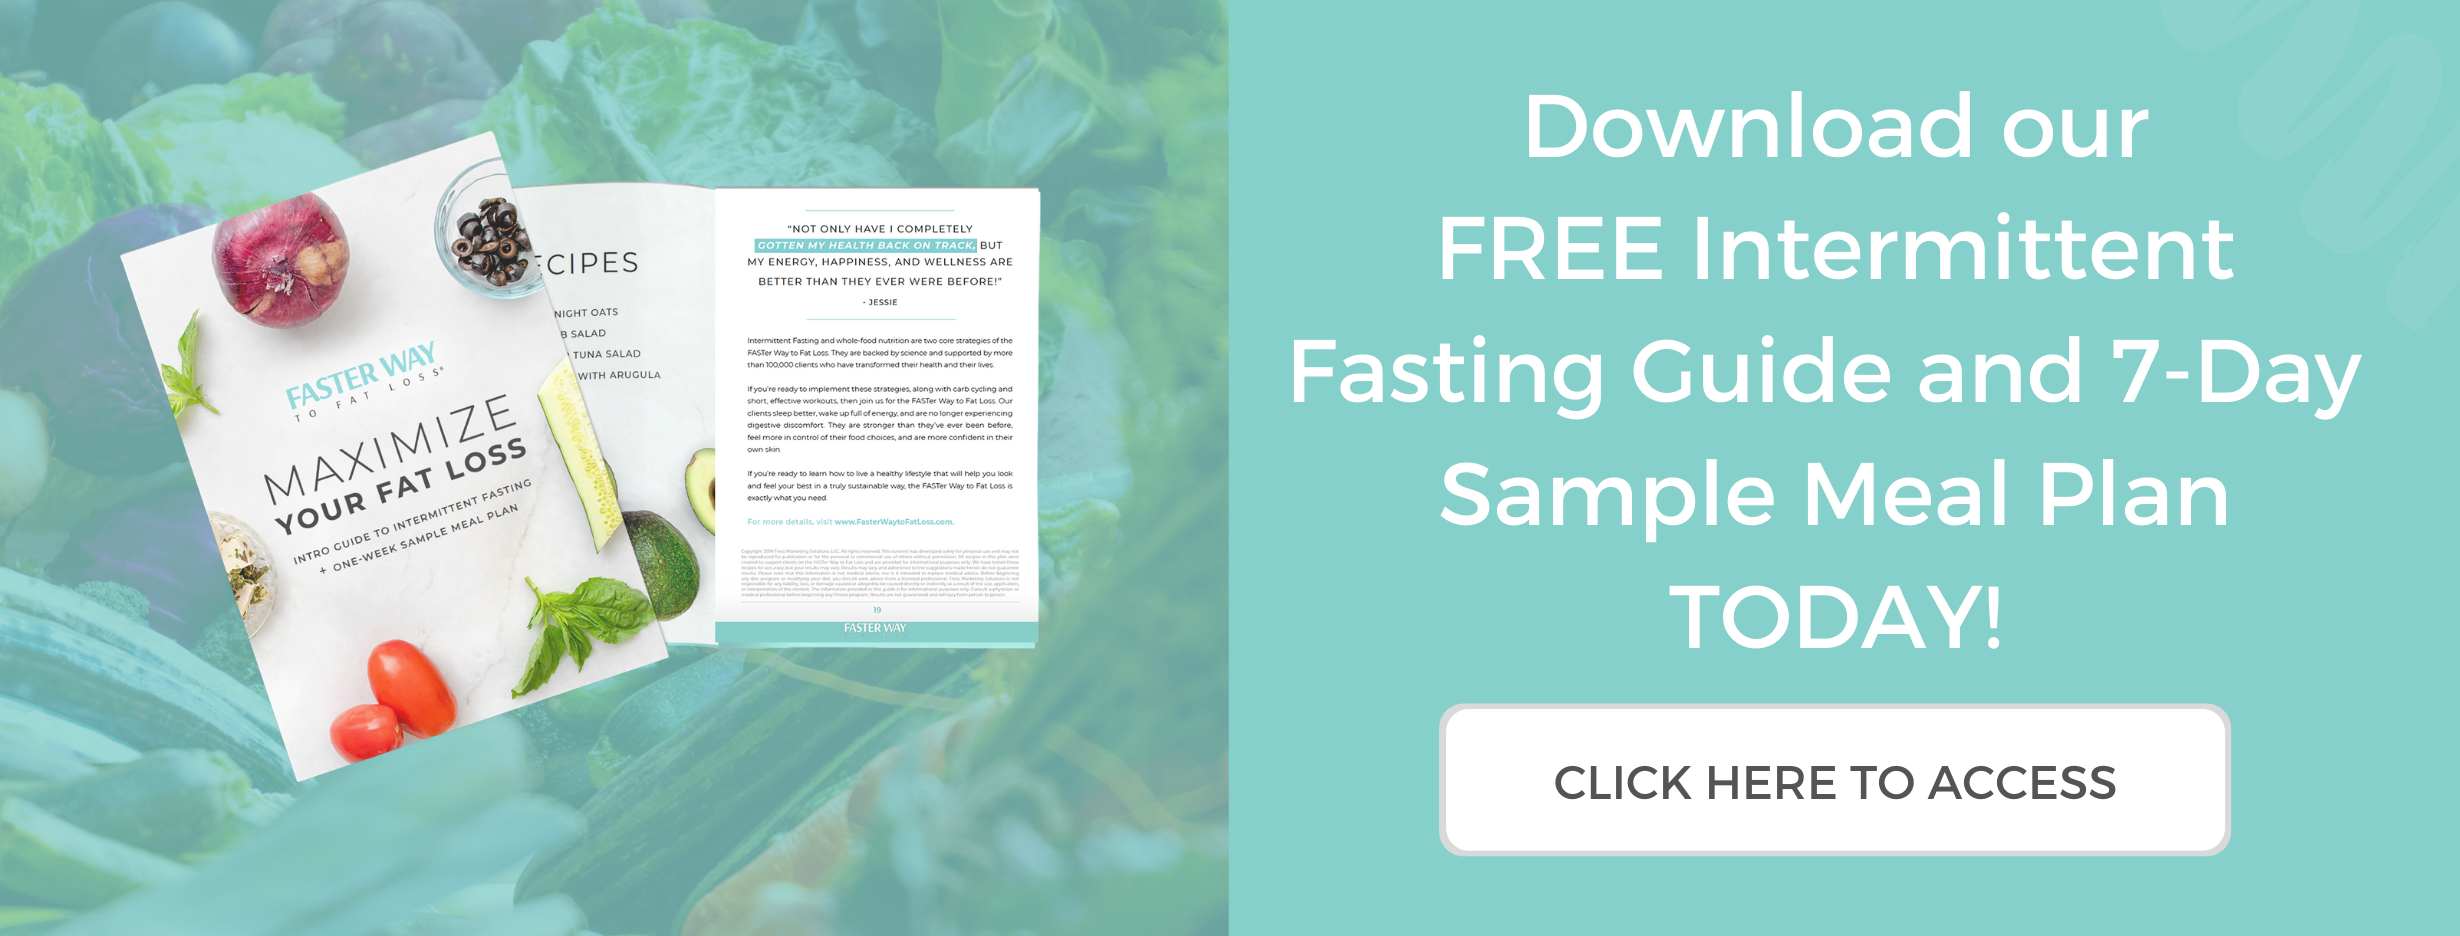 Free Intermittent Fasting Guide and 7-Day Meal Guide